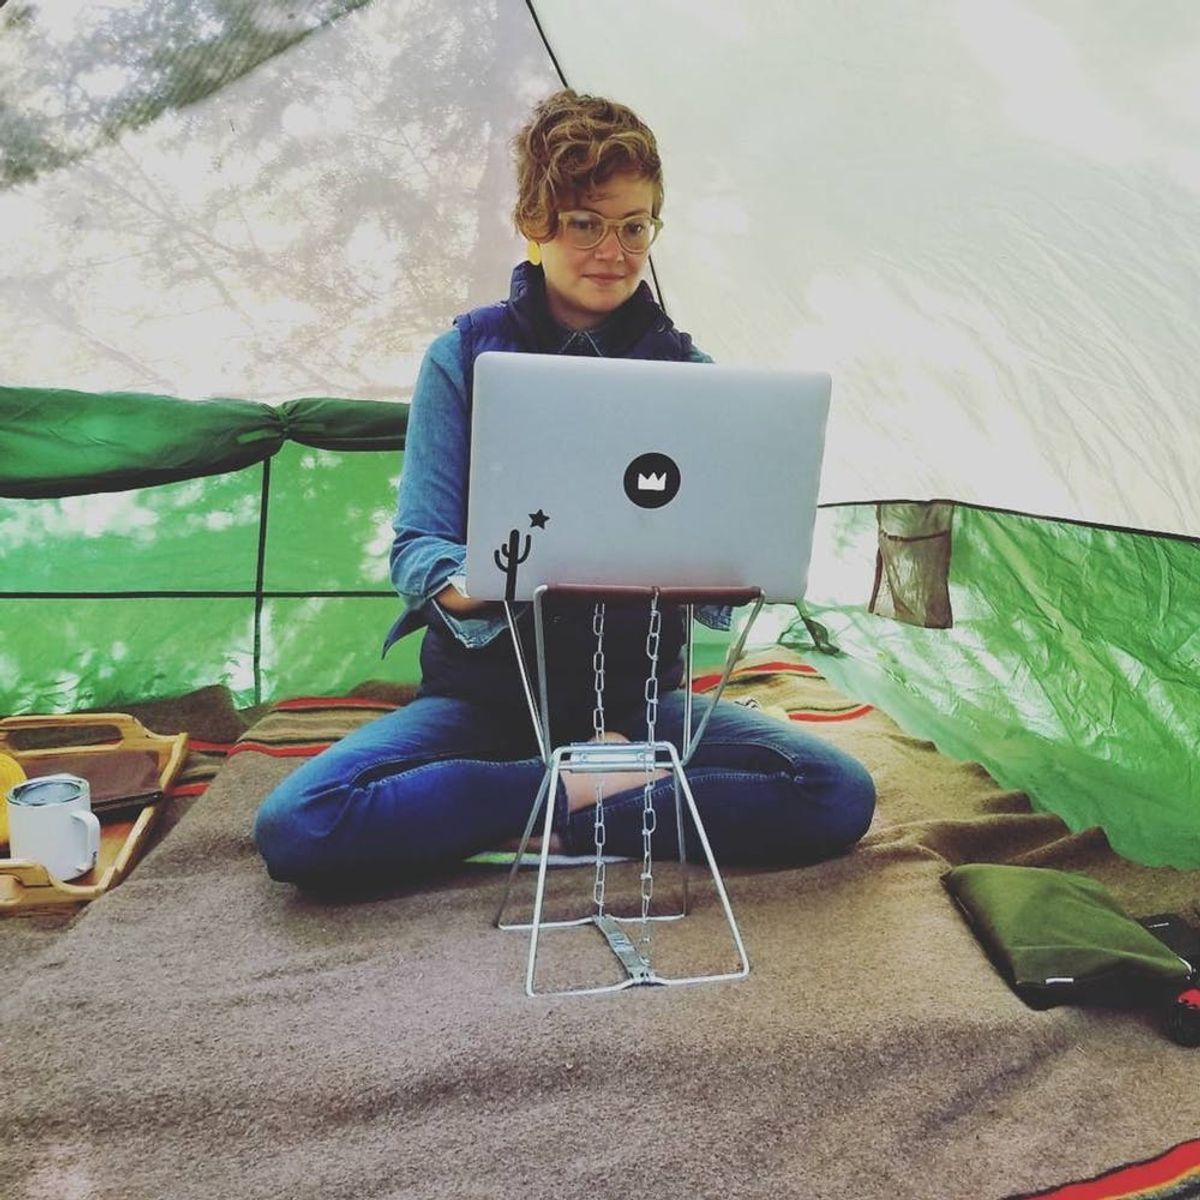 9 Tips on Working Remotely from a Woman Who Camps Full-Time